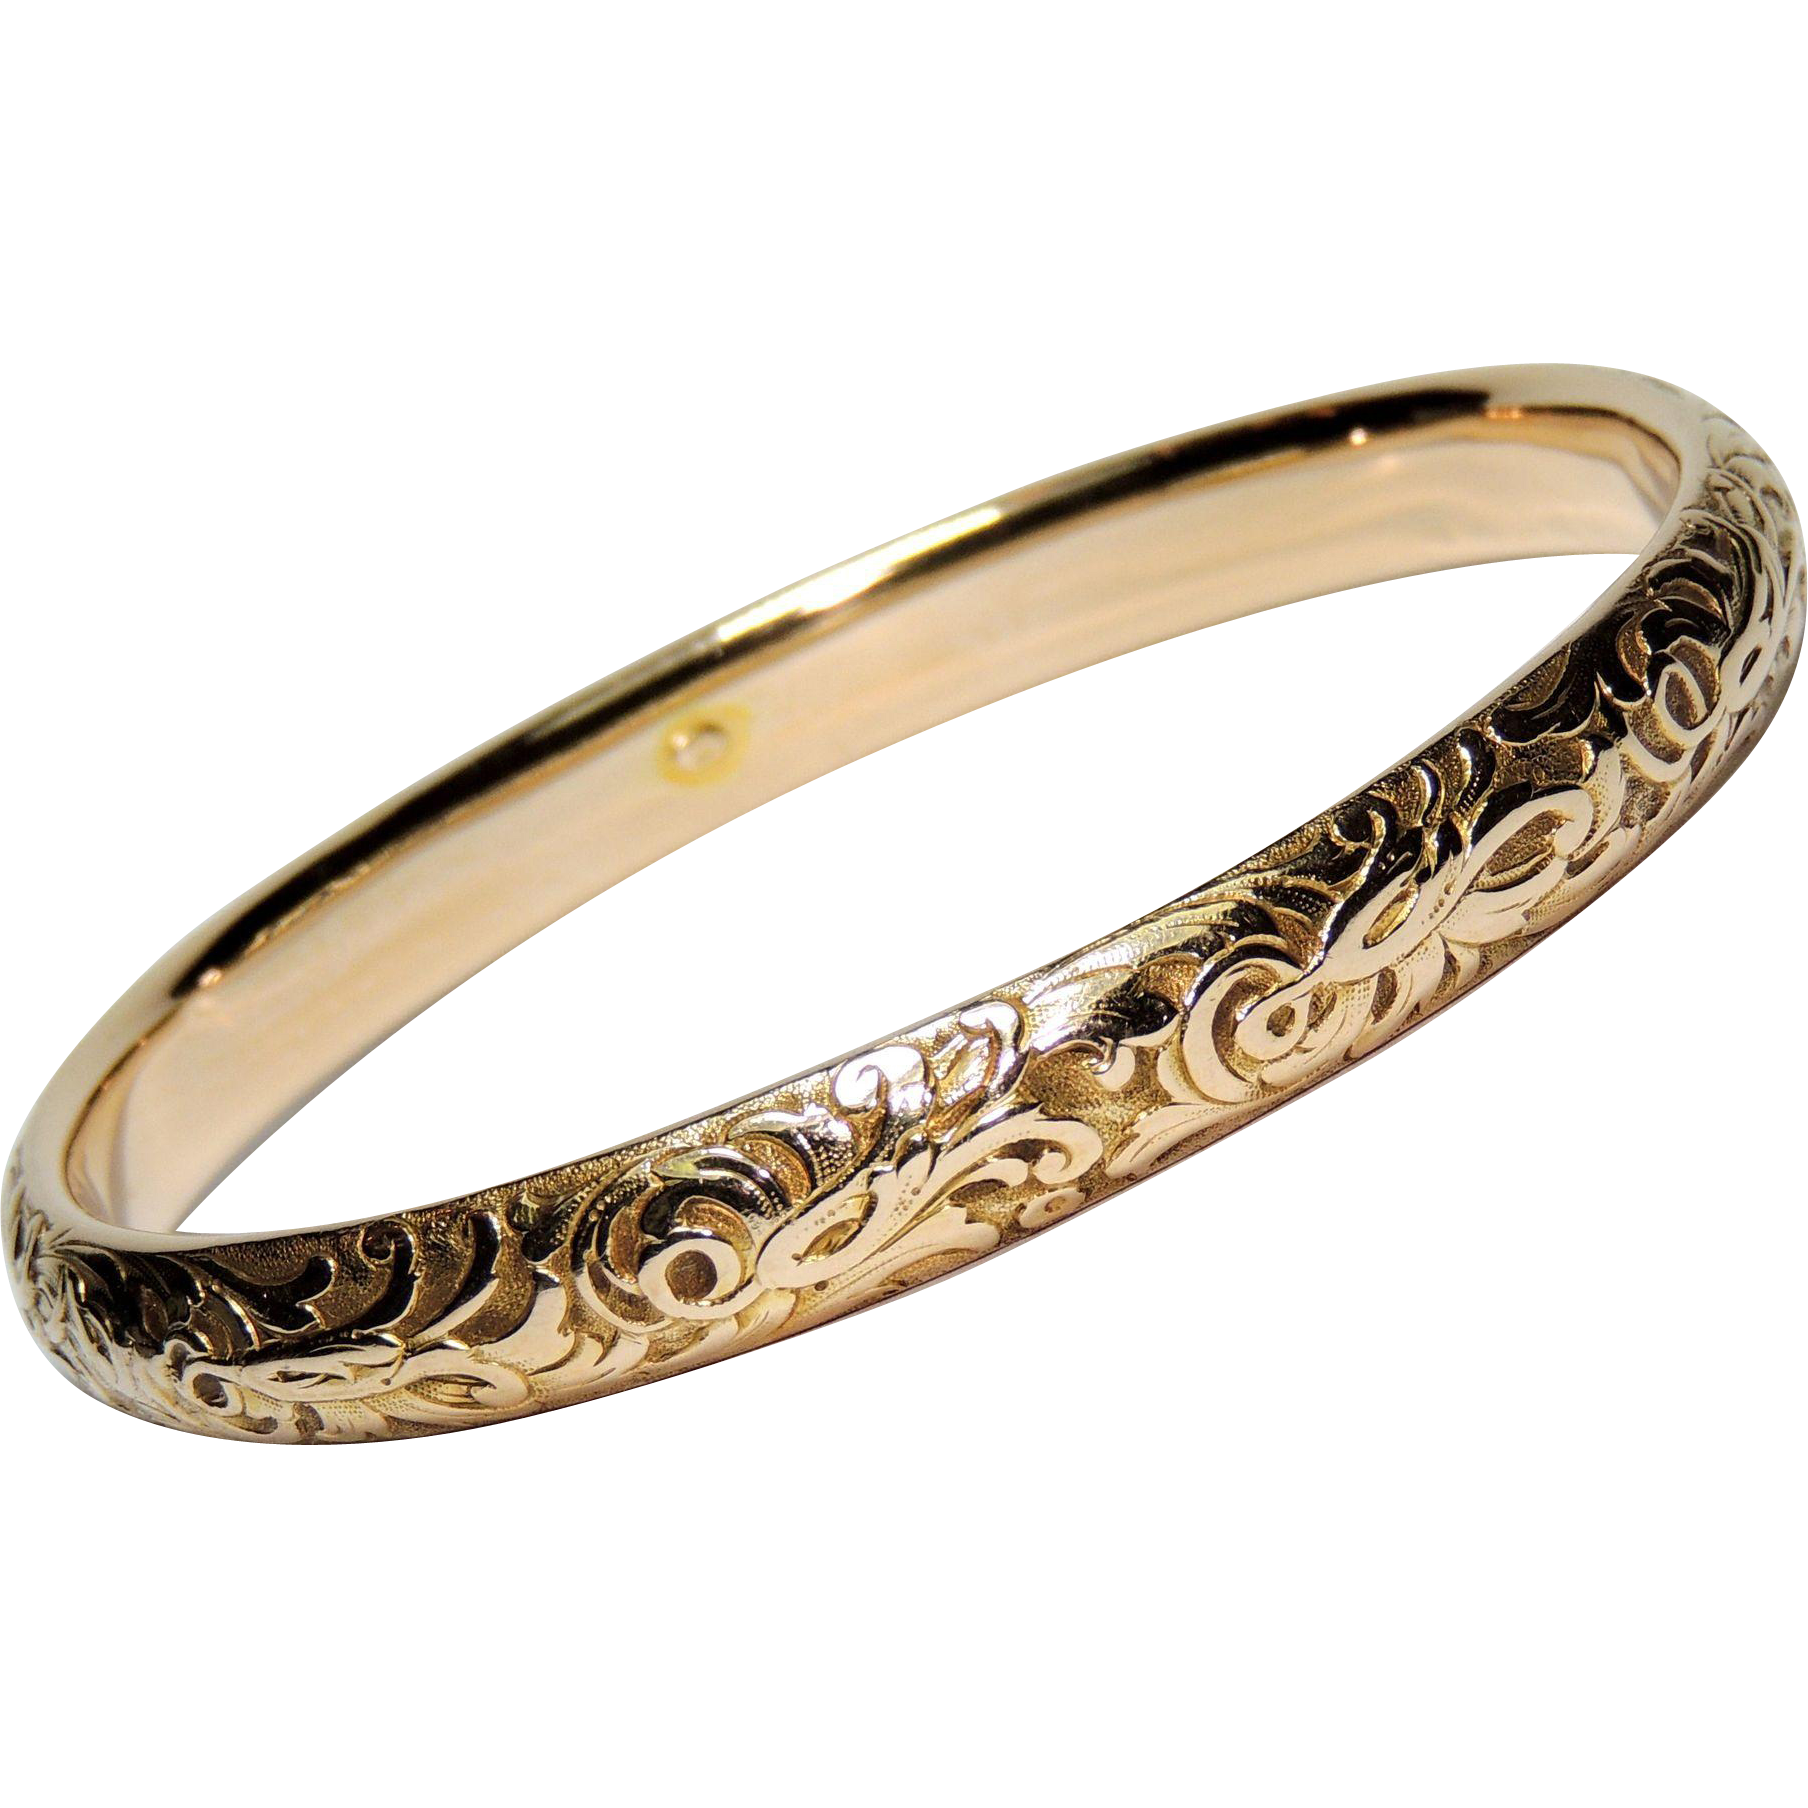 Occasions on which an individual should put on a gold bangle bracelet